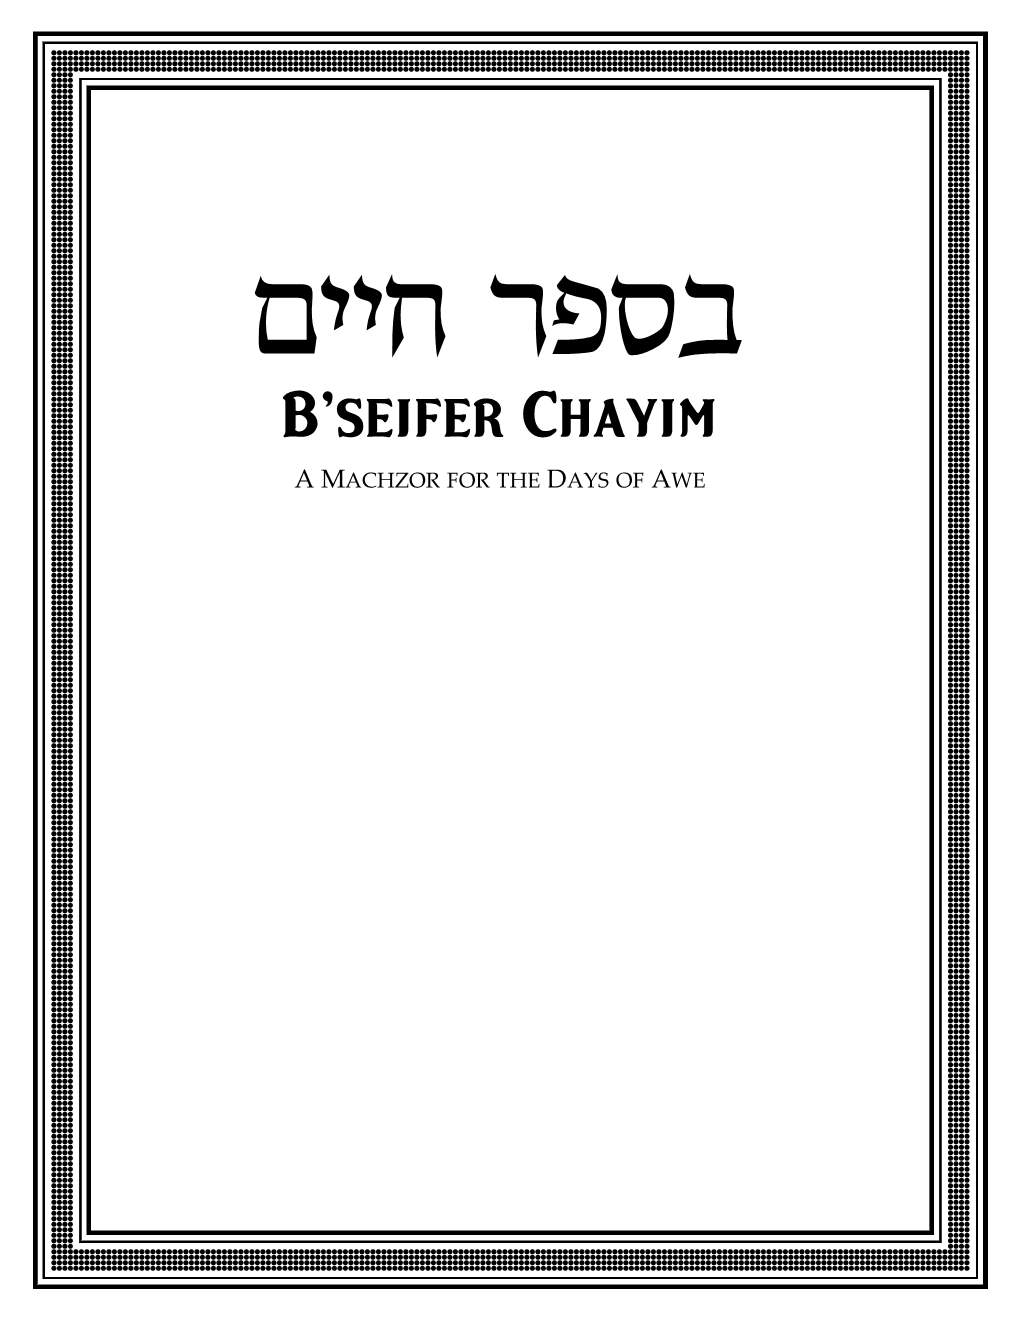 B'seifer Chayim: a Machzor for the Days Of